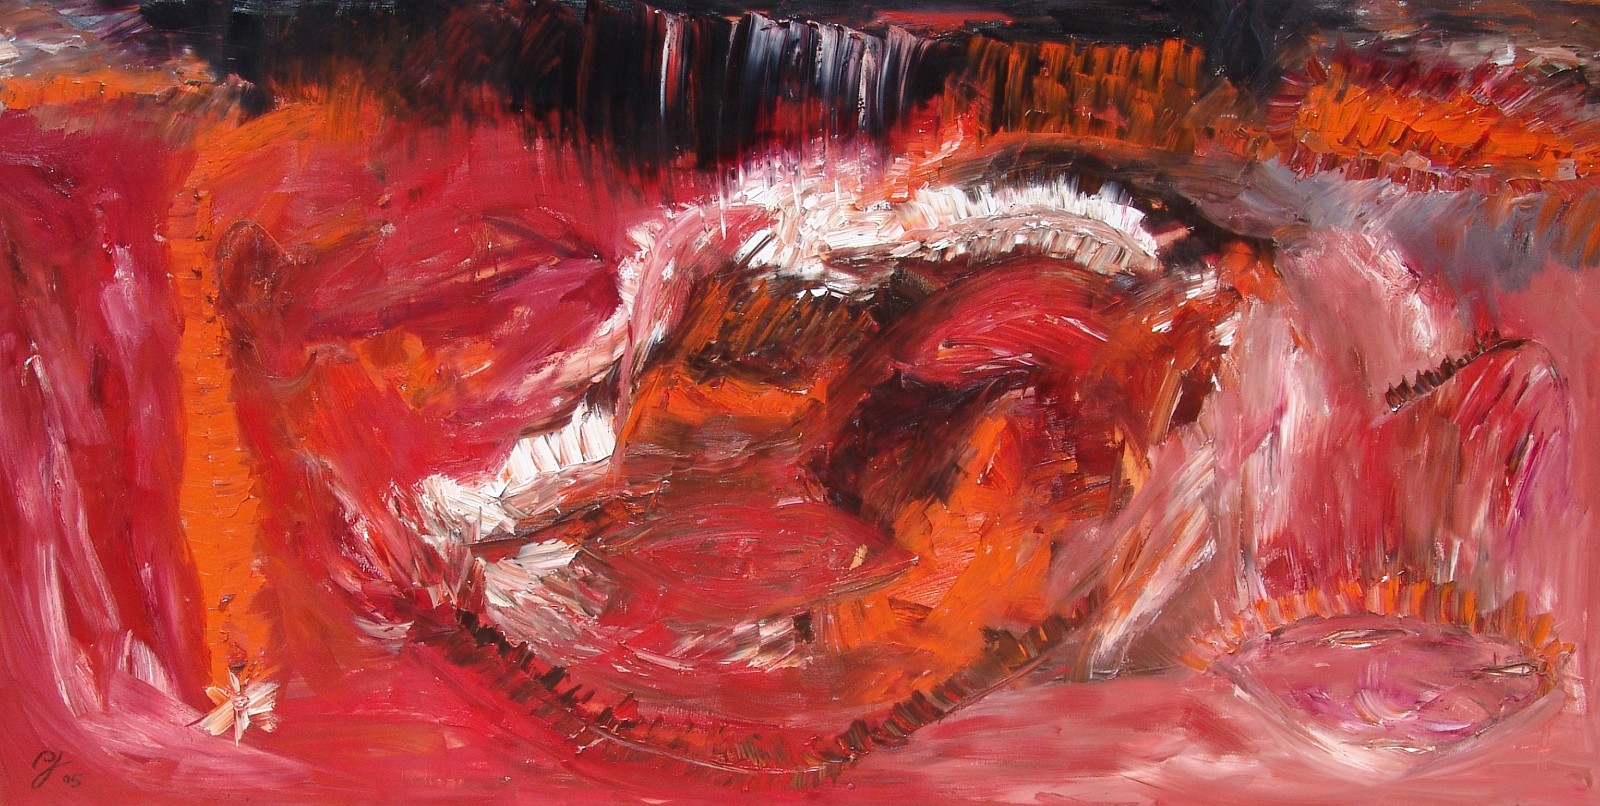 Diego Jacobson, Face off, 2005
Oil on Canvas, 120 x 60 in. (304.8 x 152.4 cm)
0694